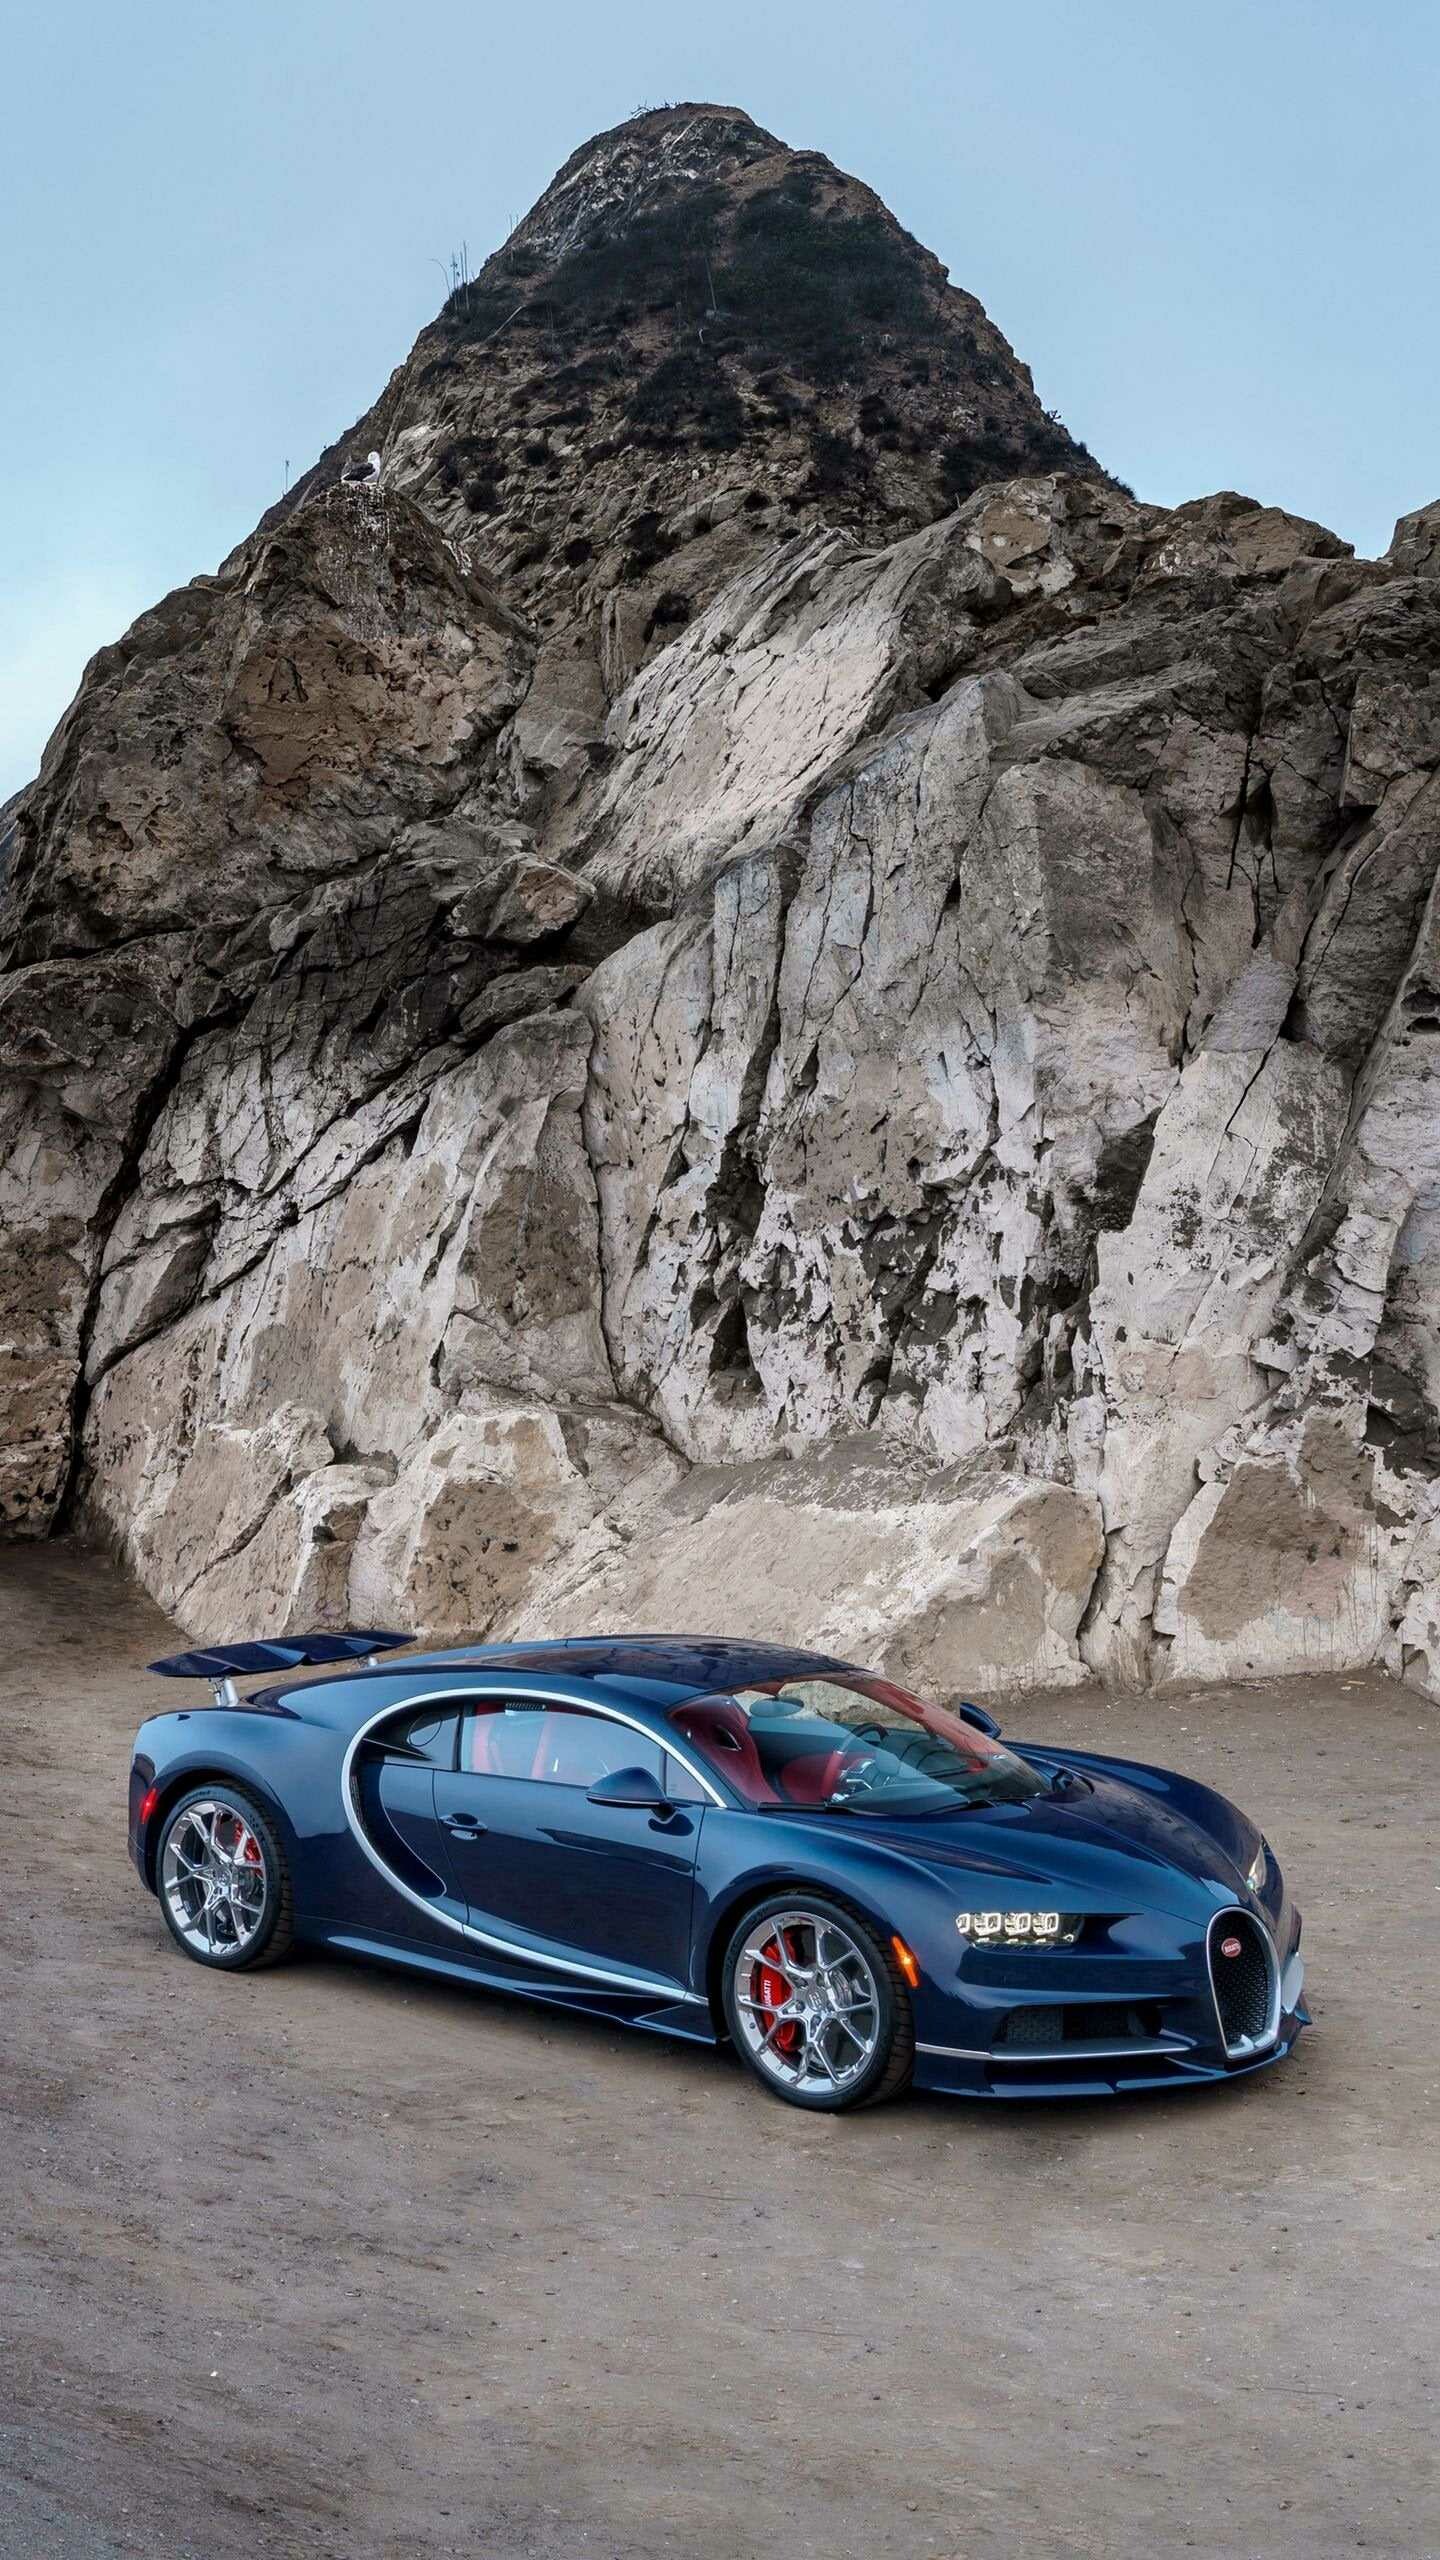 Bugatti: Chiron, named after the Monégasque driver Louis Chiron. 1440x2560 HD Wallpaper.